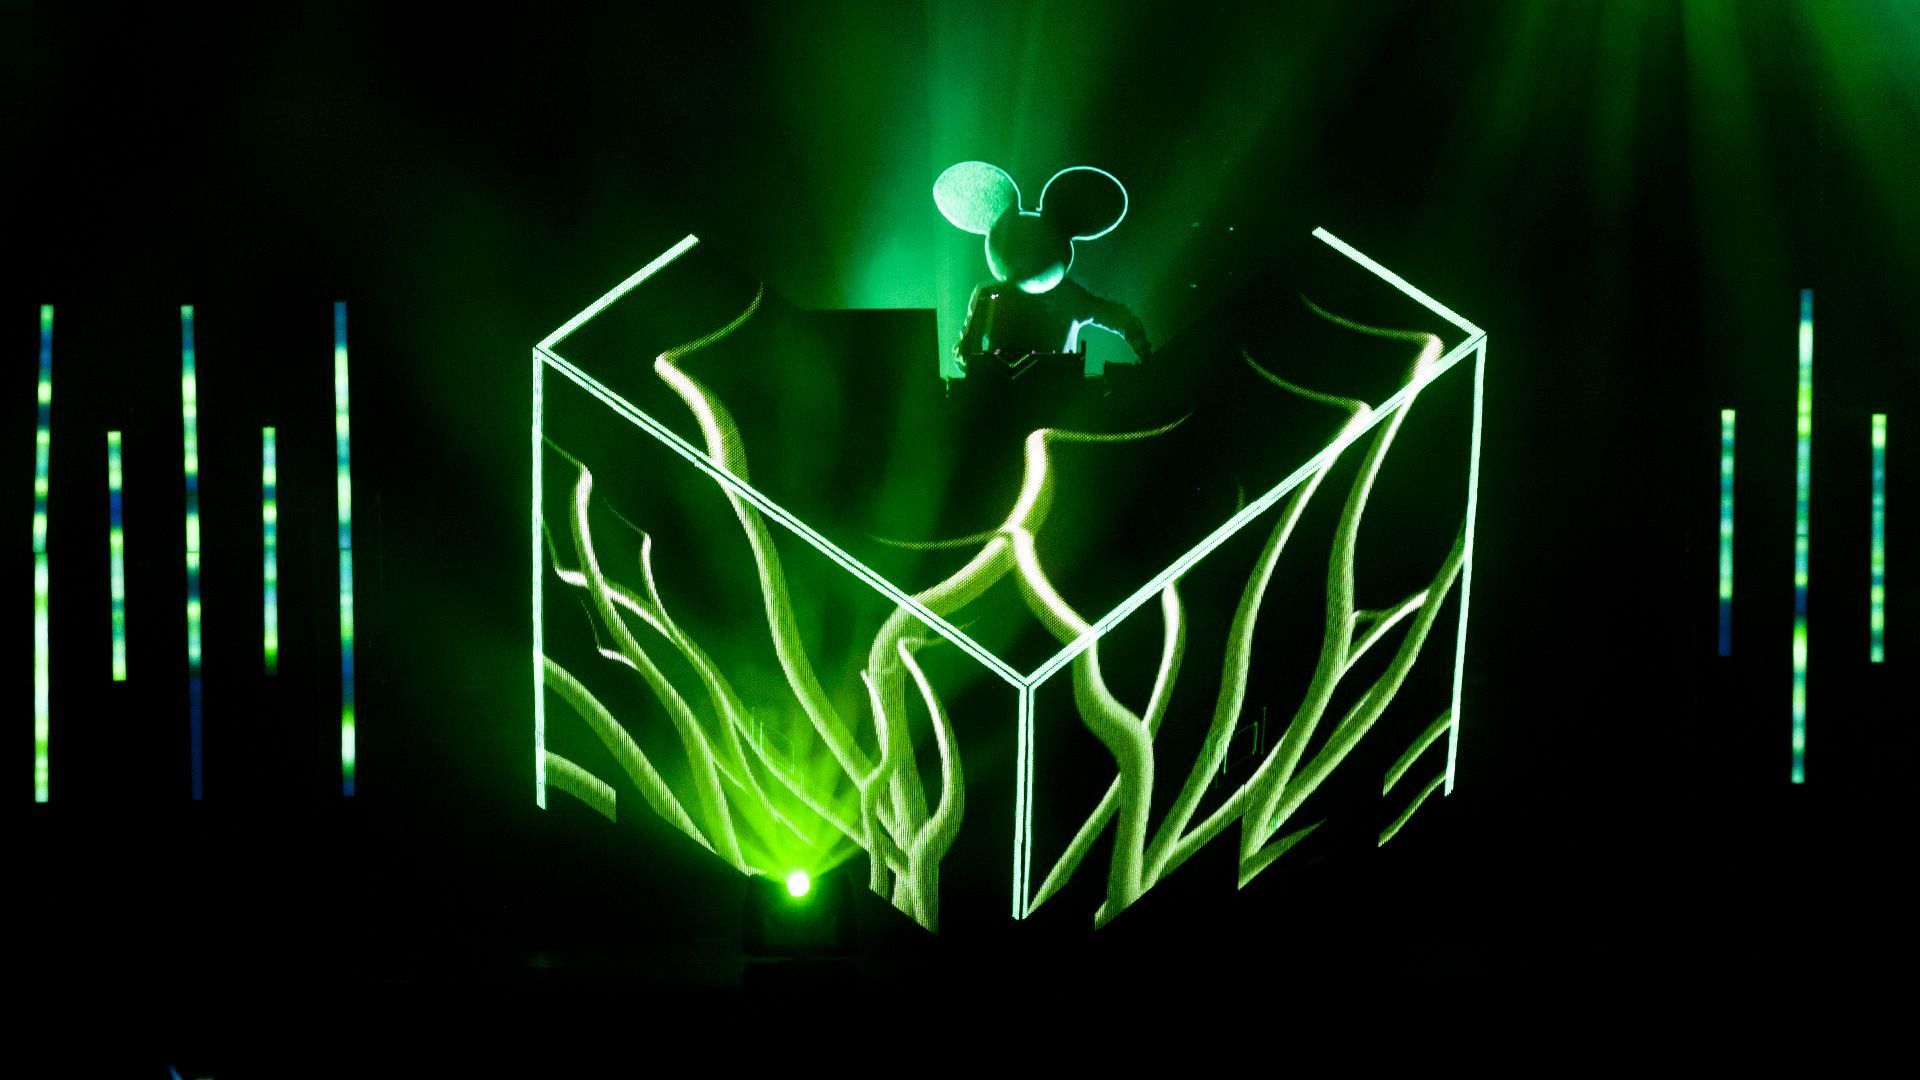 63 Deadmau5 HD Wallpapers | Backgrounds - Wallpaper Abyss - Page 2